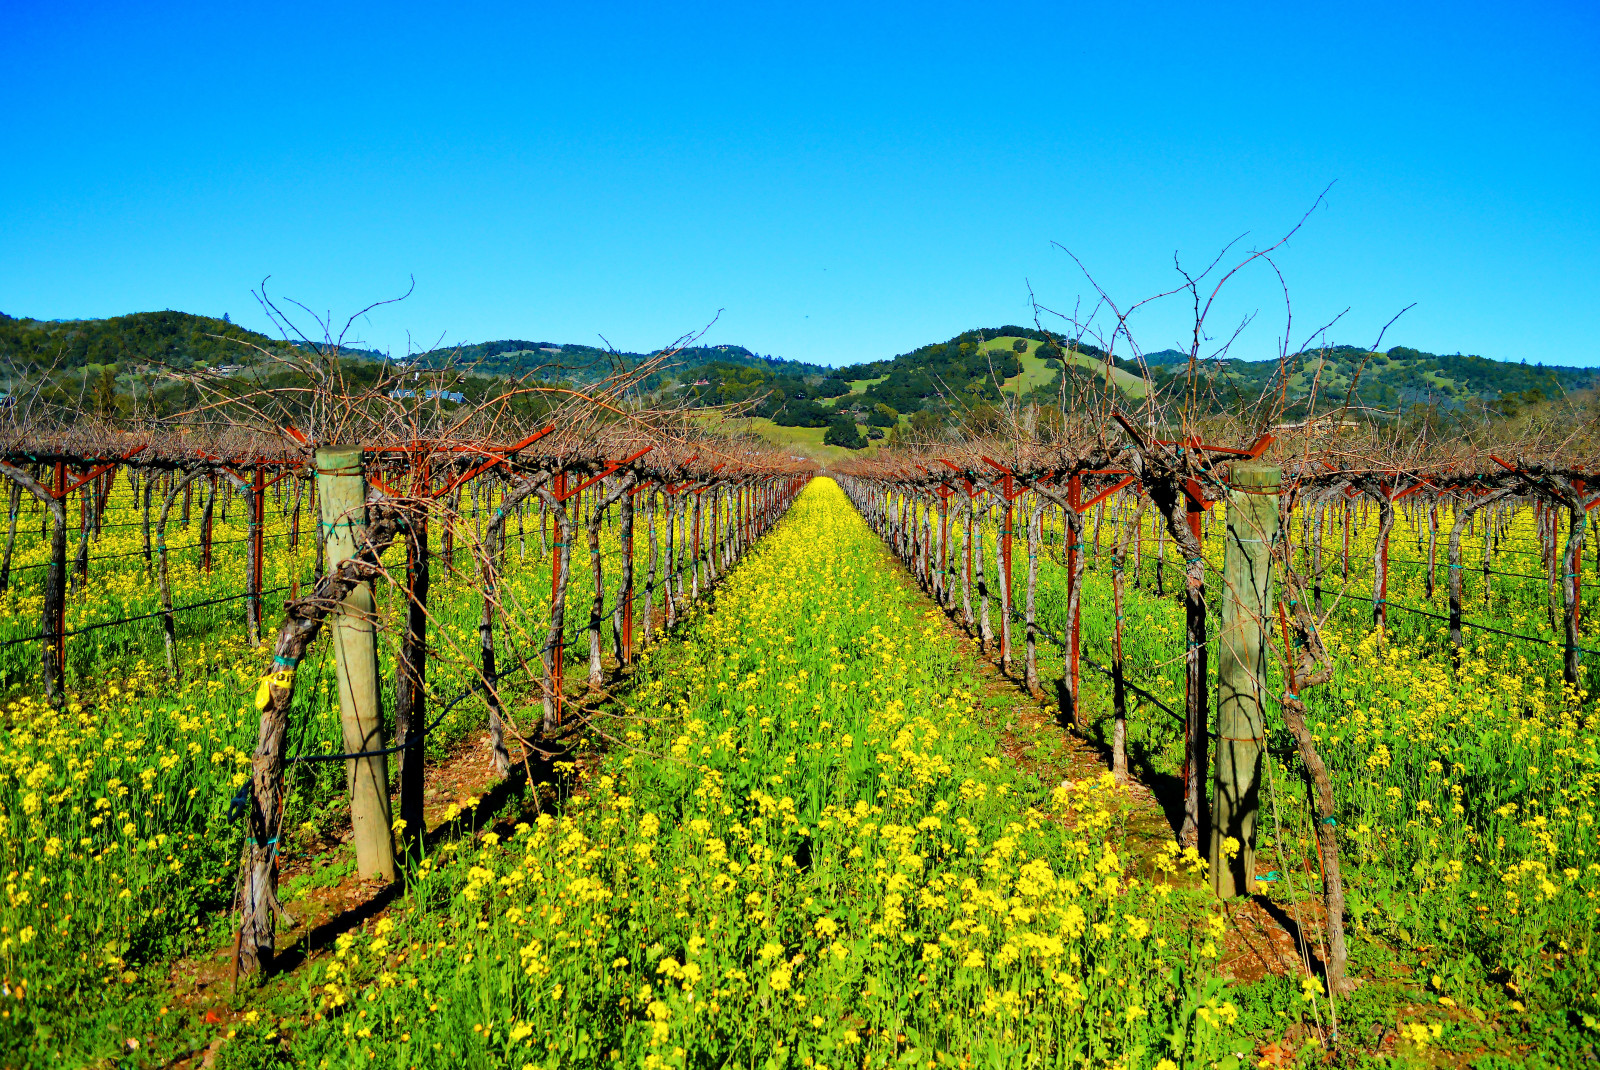 Vineyard in Santa Ynez Valley, California with bright green grass and yellow flowers and green hills in the background